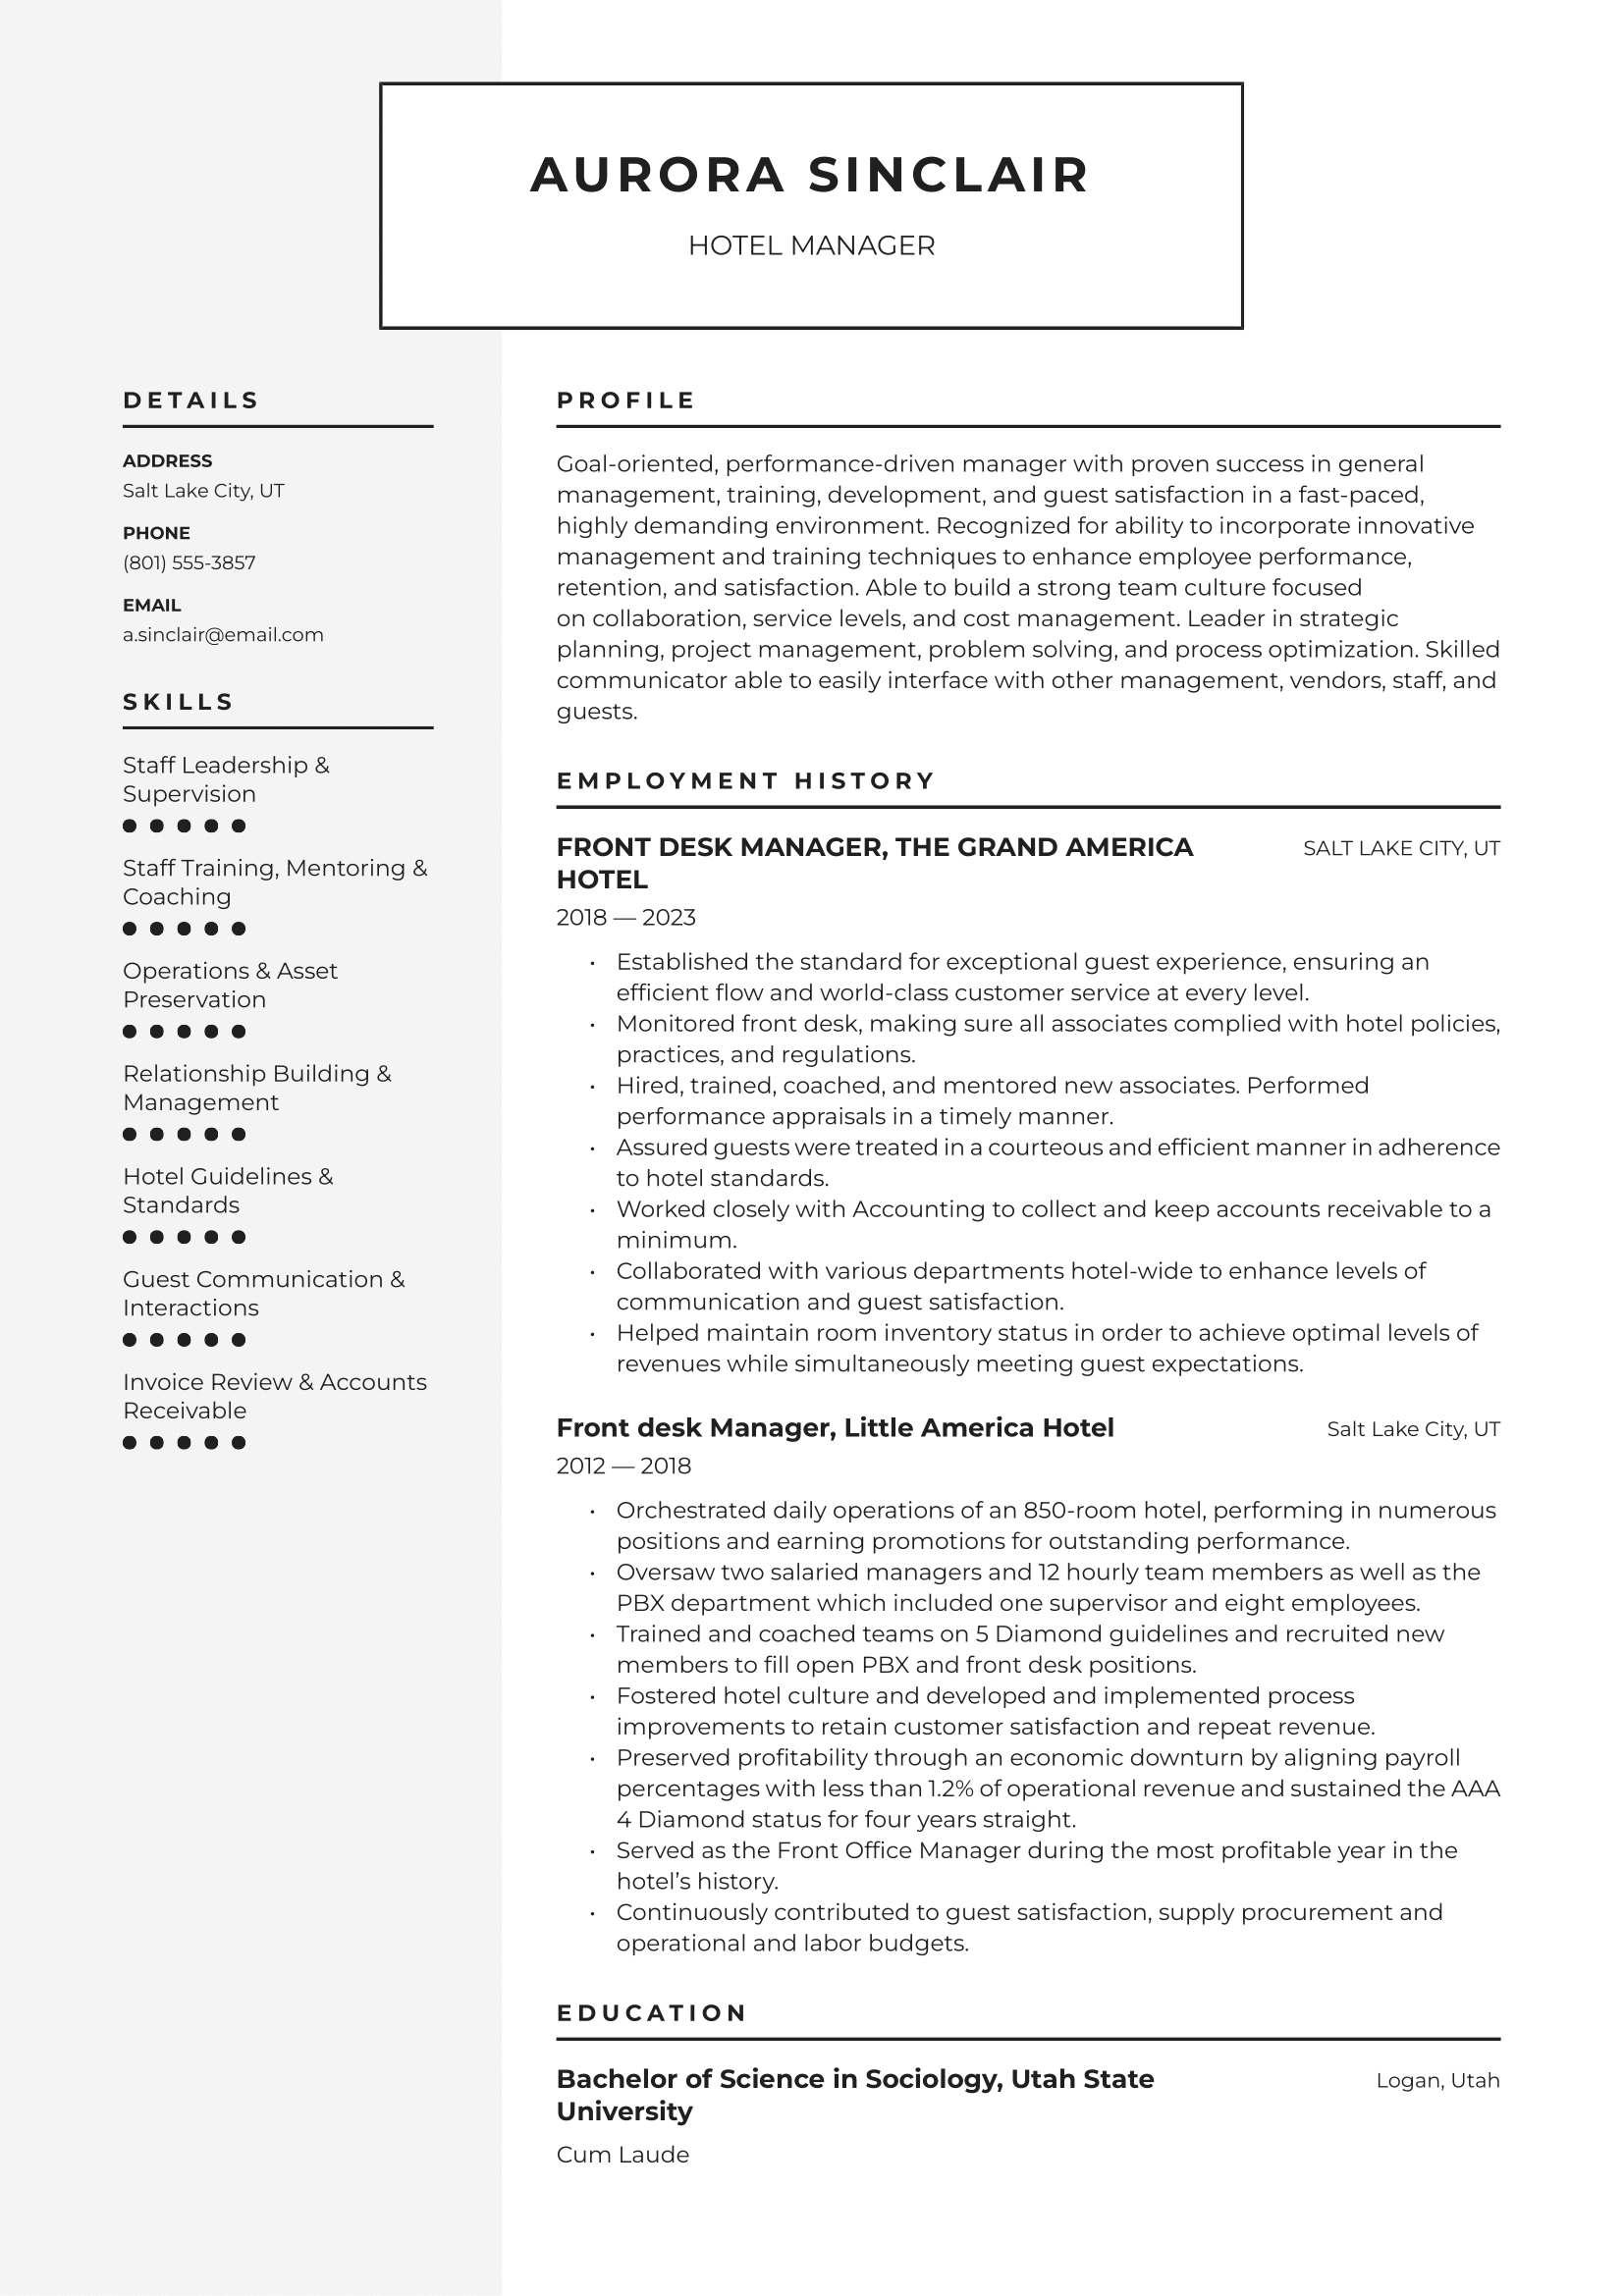 Hotel Manager Resume Example & Writing Guide